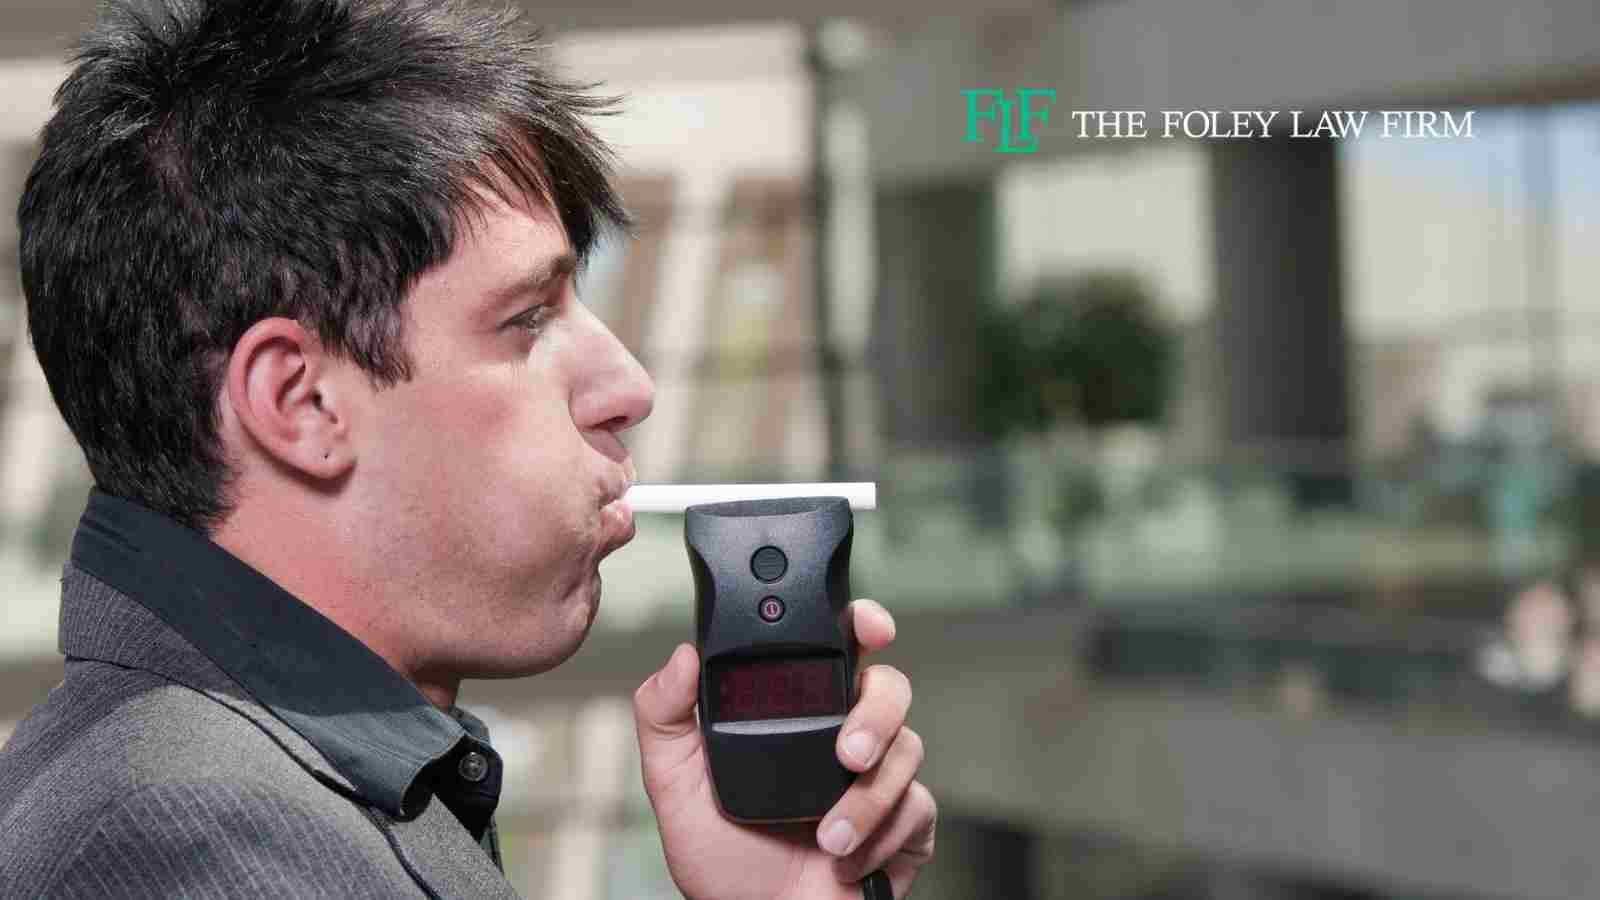 Masking The Smell Of Alcohol And Other Attempts At Avoiding A DUI